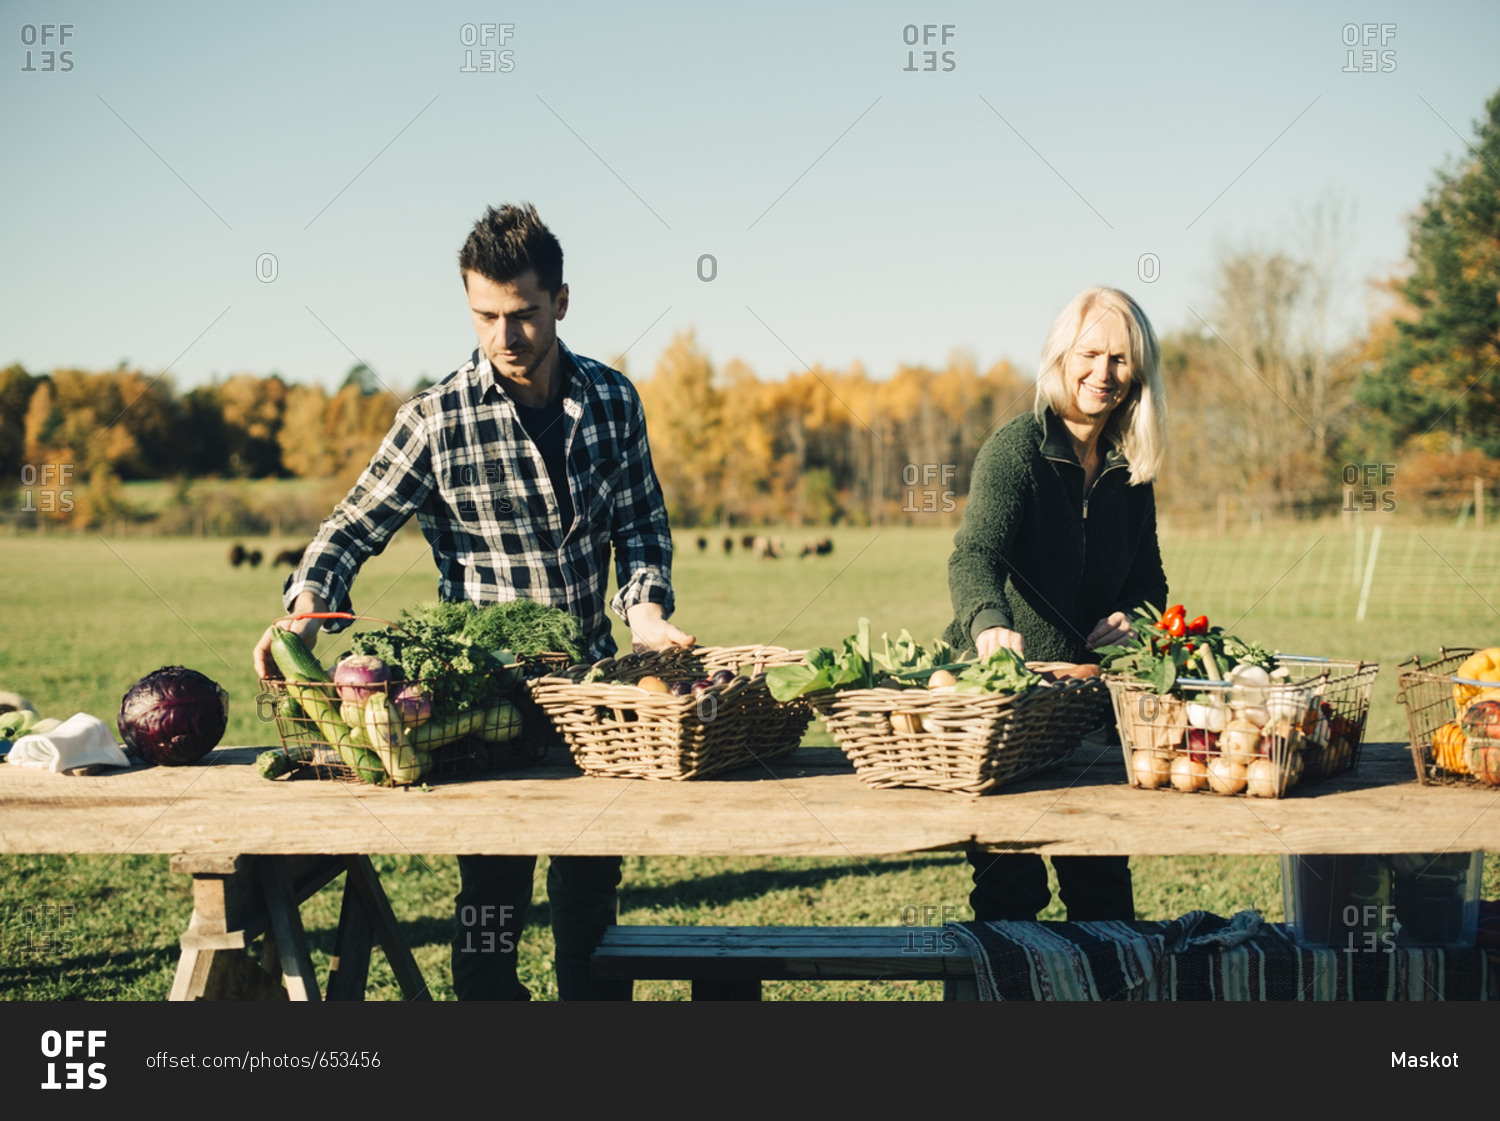 Male and female farmers arranging organic vegetables for sale on table